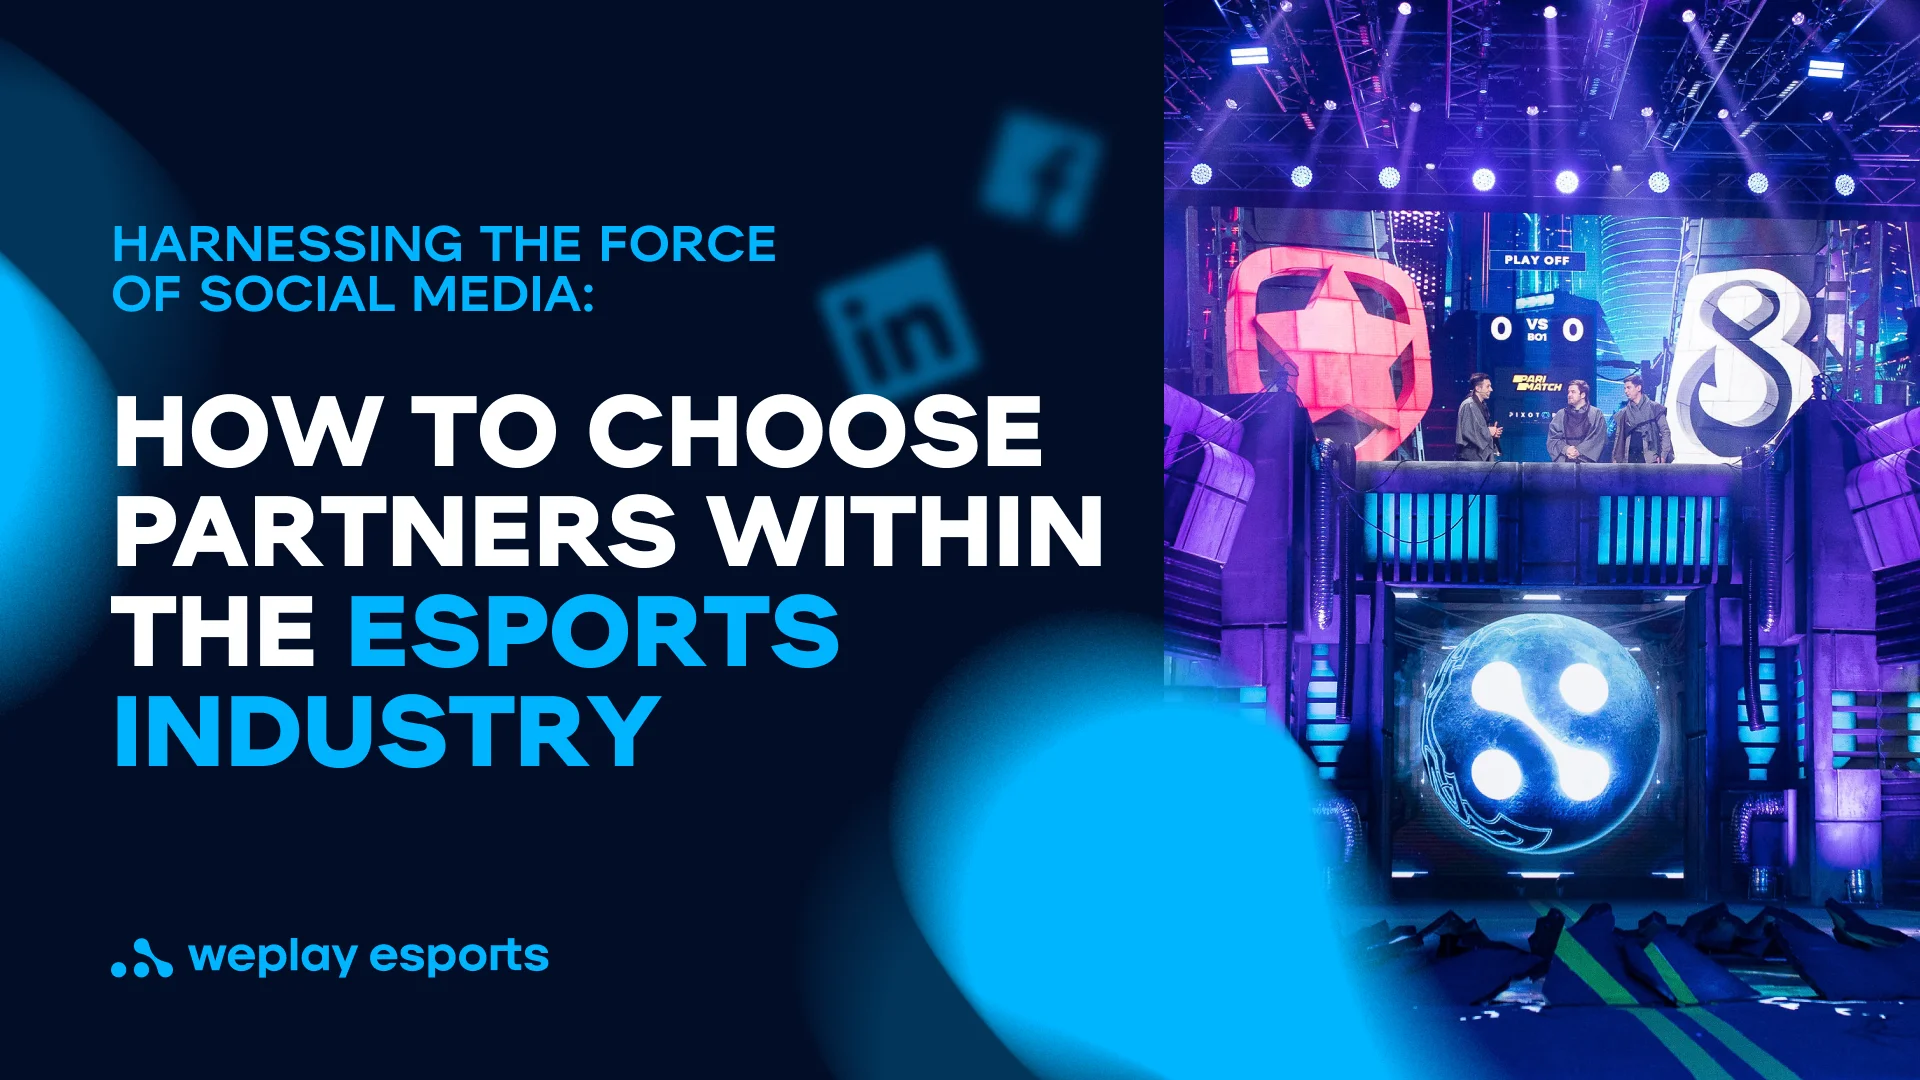 Harnessing the force of social media how to choose partners within the esports industry